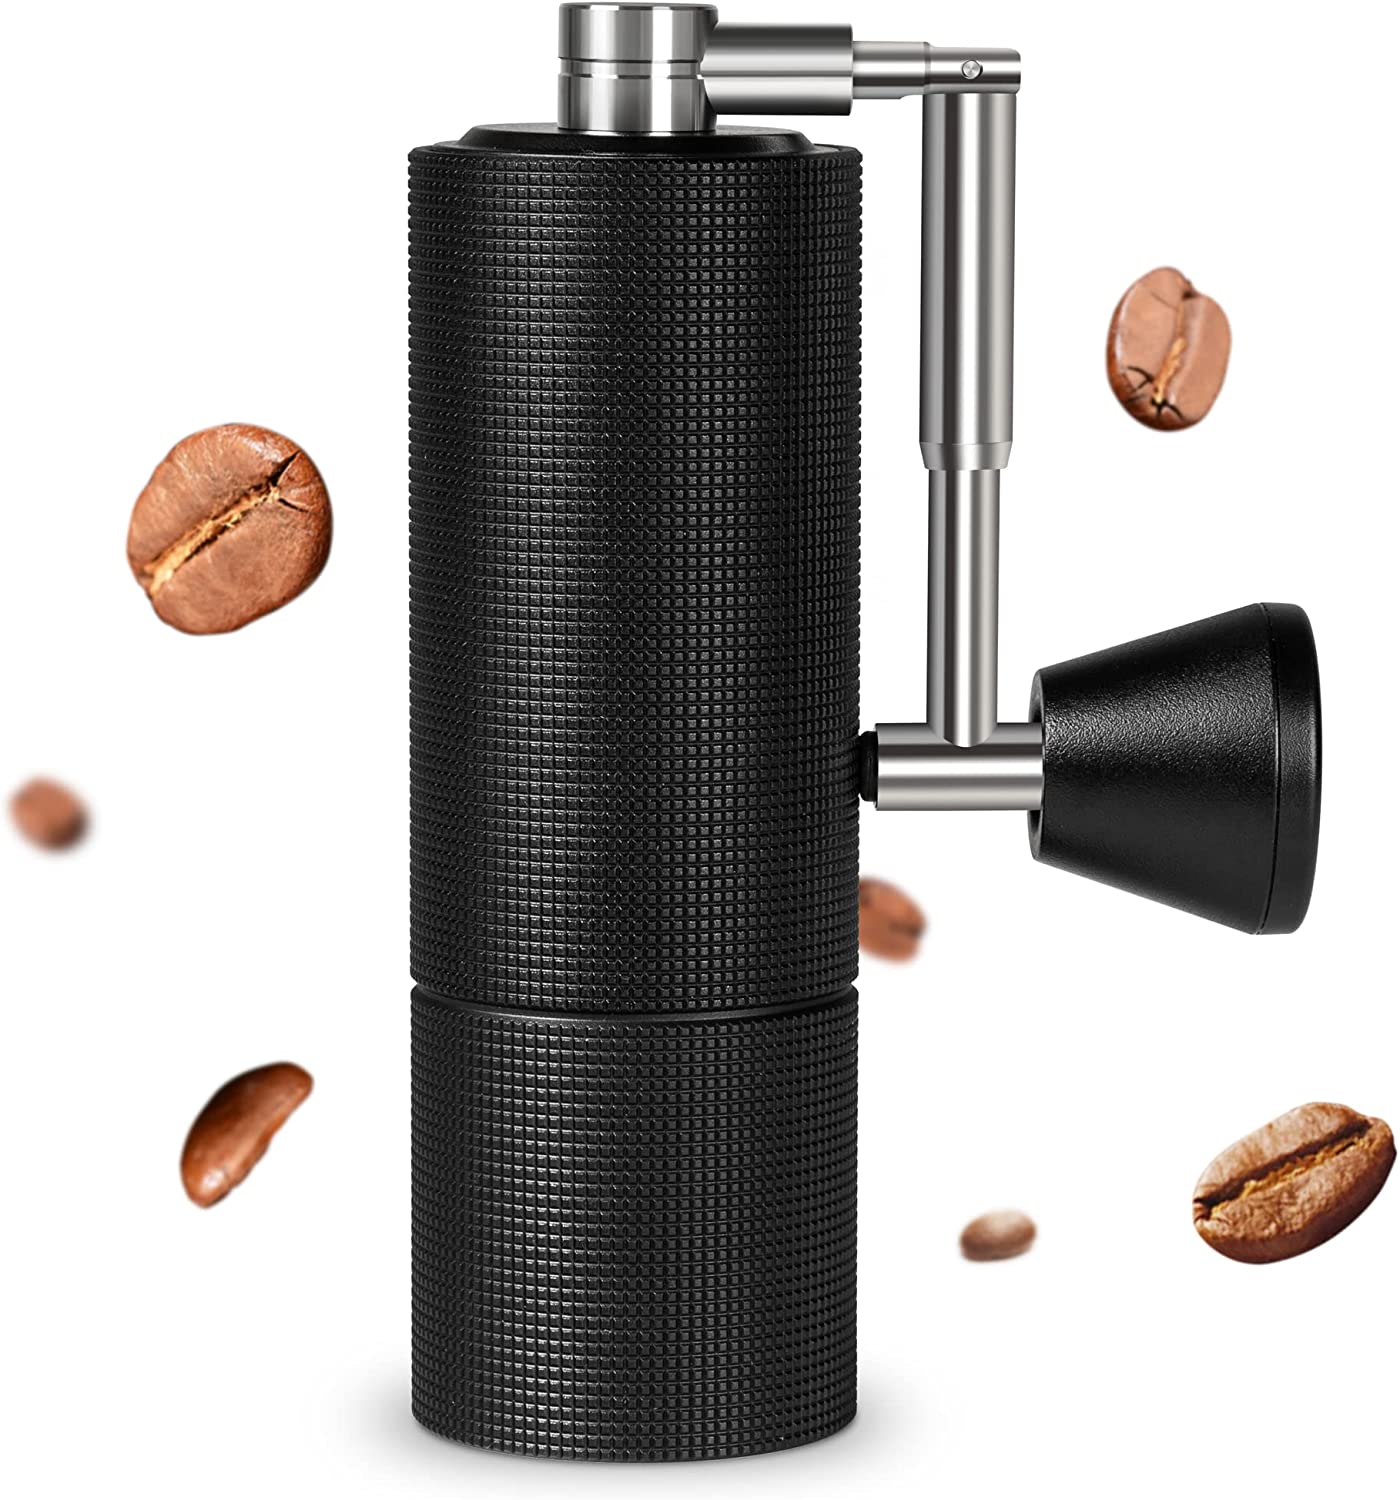 TIMEMORE Chestnut C3 PRO Manual Coffee Grinder, Stainless Steel Coffee Grinder with Cone Grinder, Hand Coffee Grinder with Folding Handle, for Espresso to French Press - Black